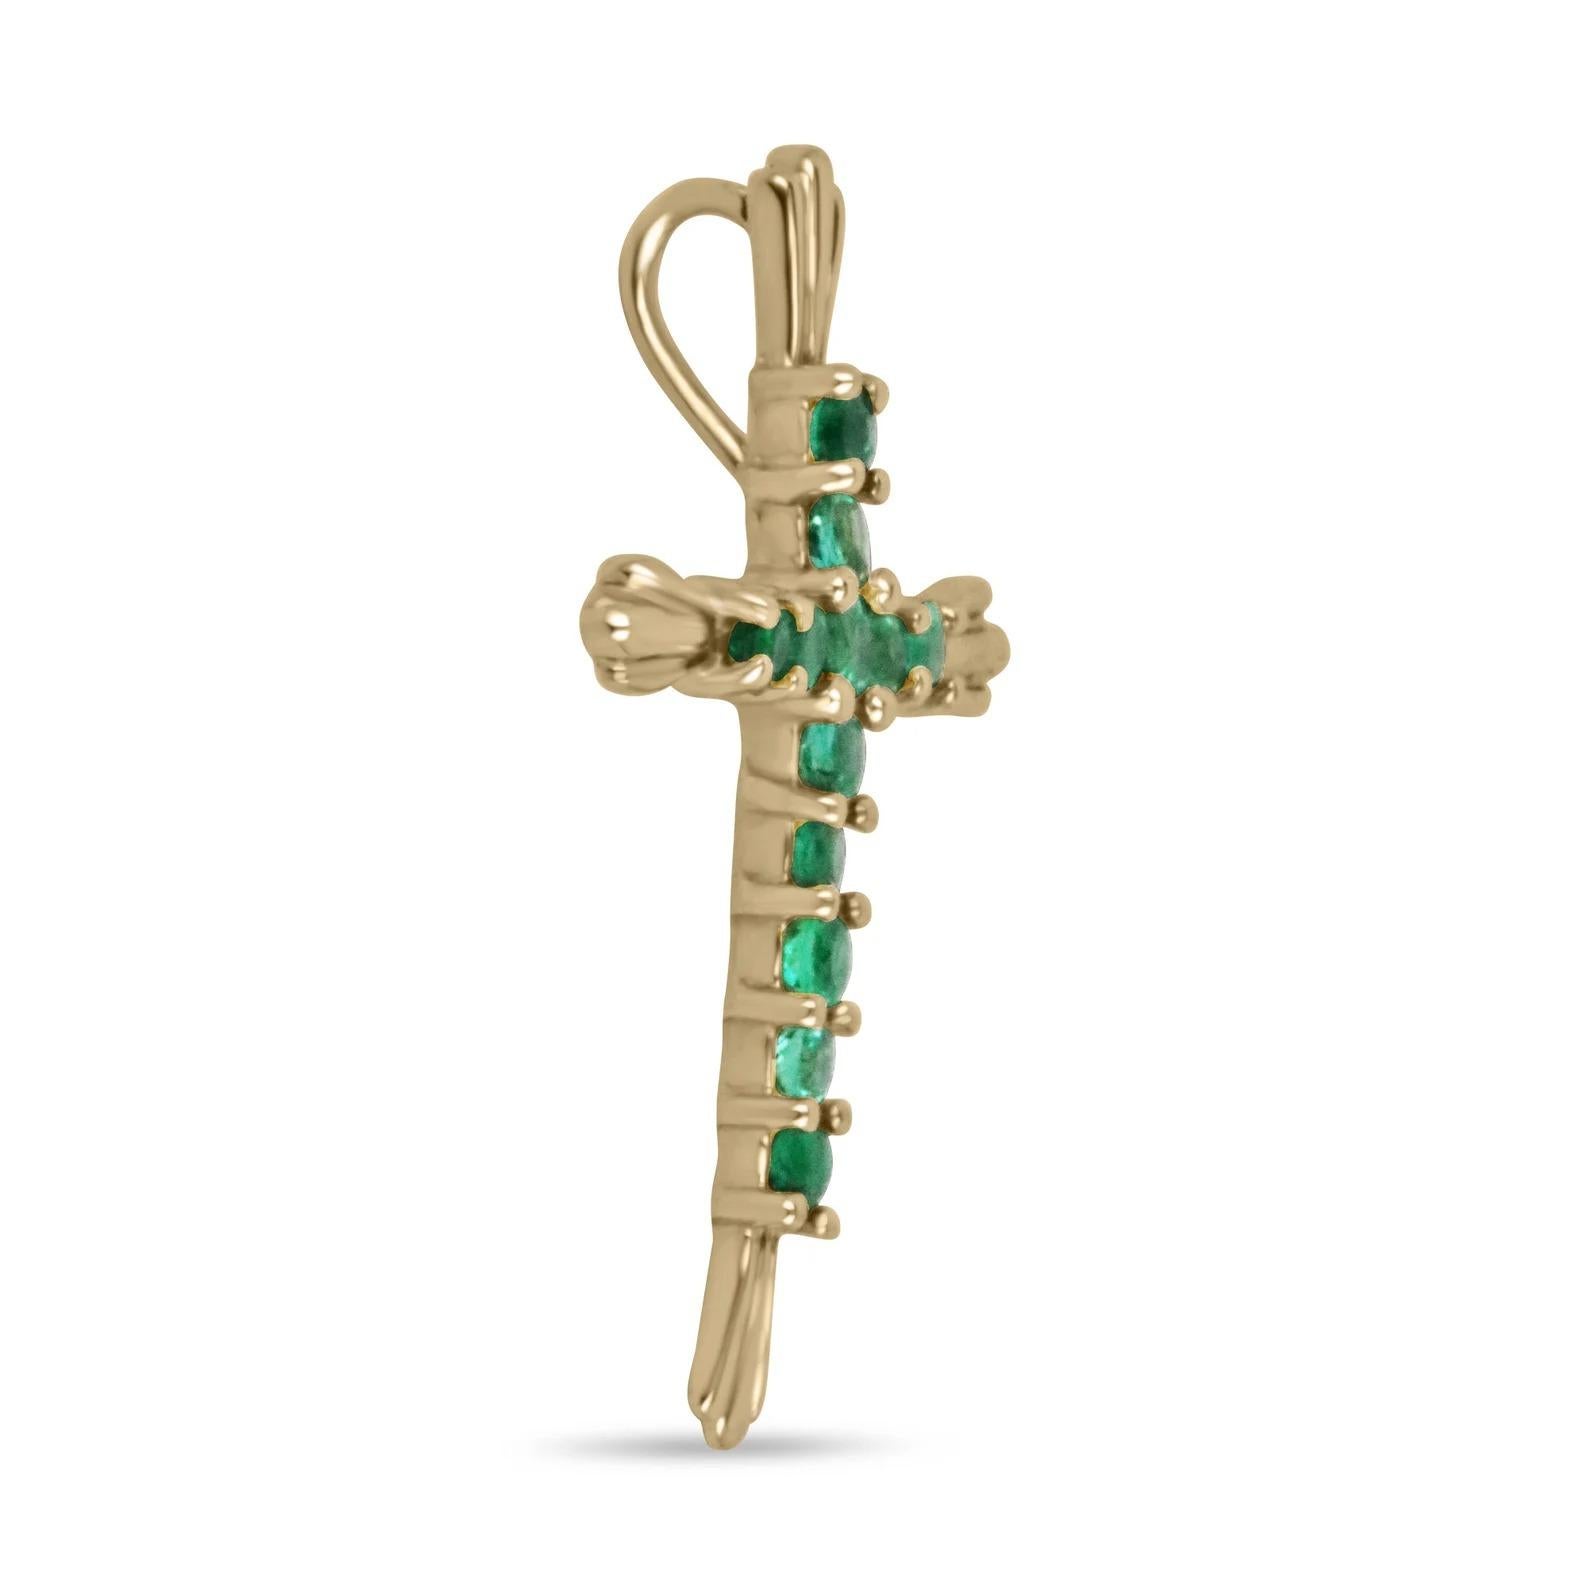 Featured is a stunning Colombian emerald cross pendant. Twelve prong set round cut Colombian emeralds are on full display. Showcasing a vivacious and dark vivid green color that is lustrous and rich. Crafted in 18K yellow gold.

*Chain sold